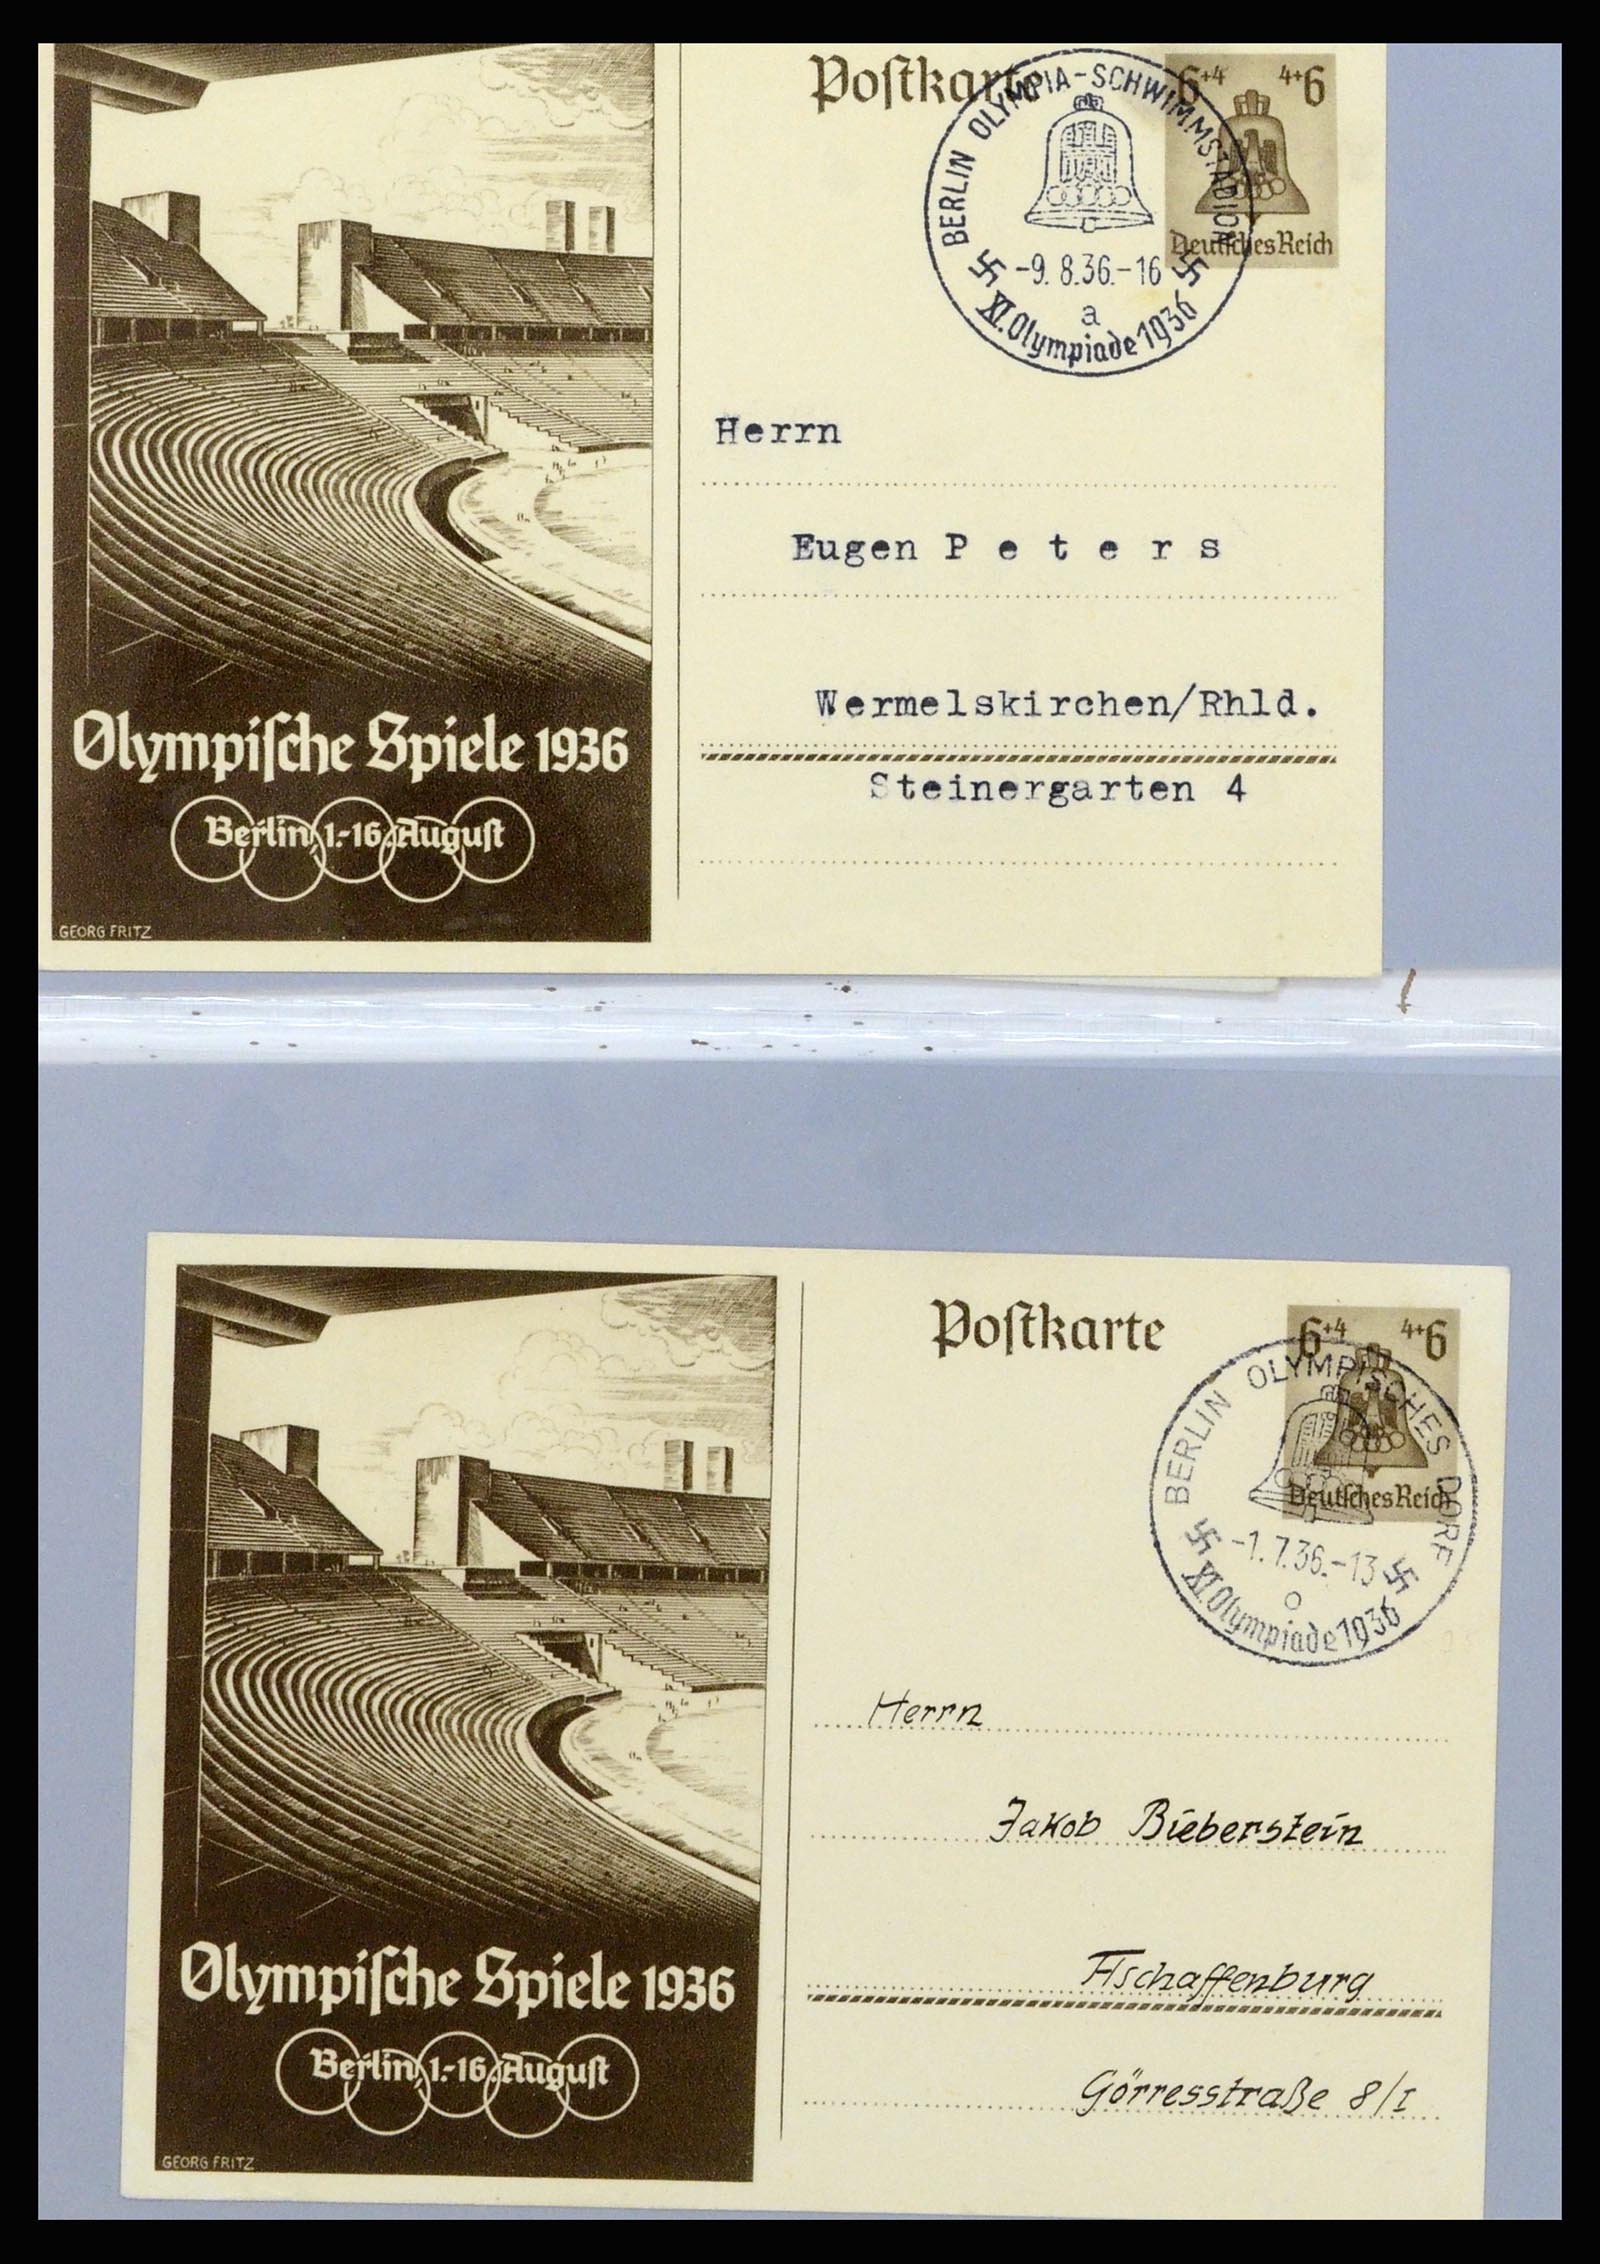 37118 062 - Stamp collection 37118 Olympics 1936.